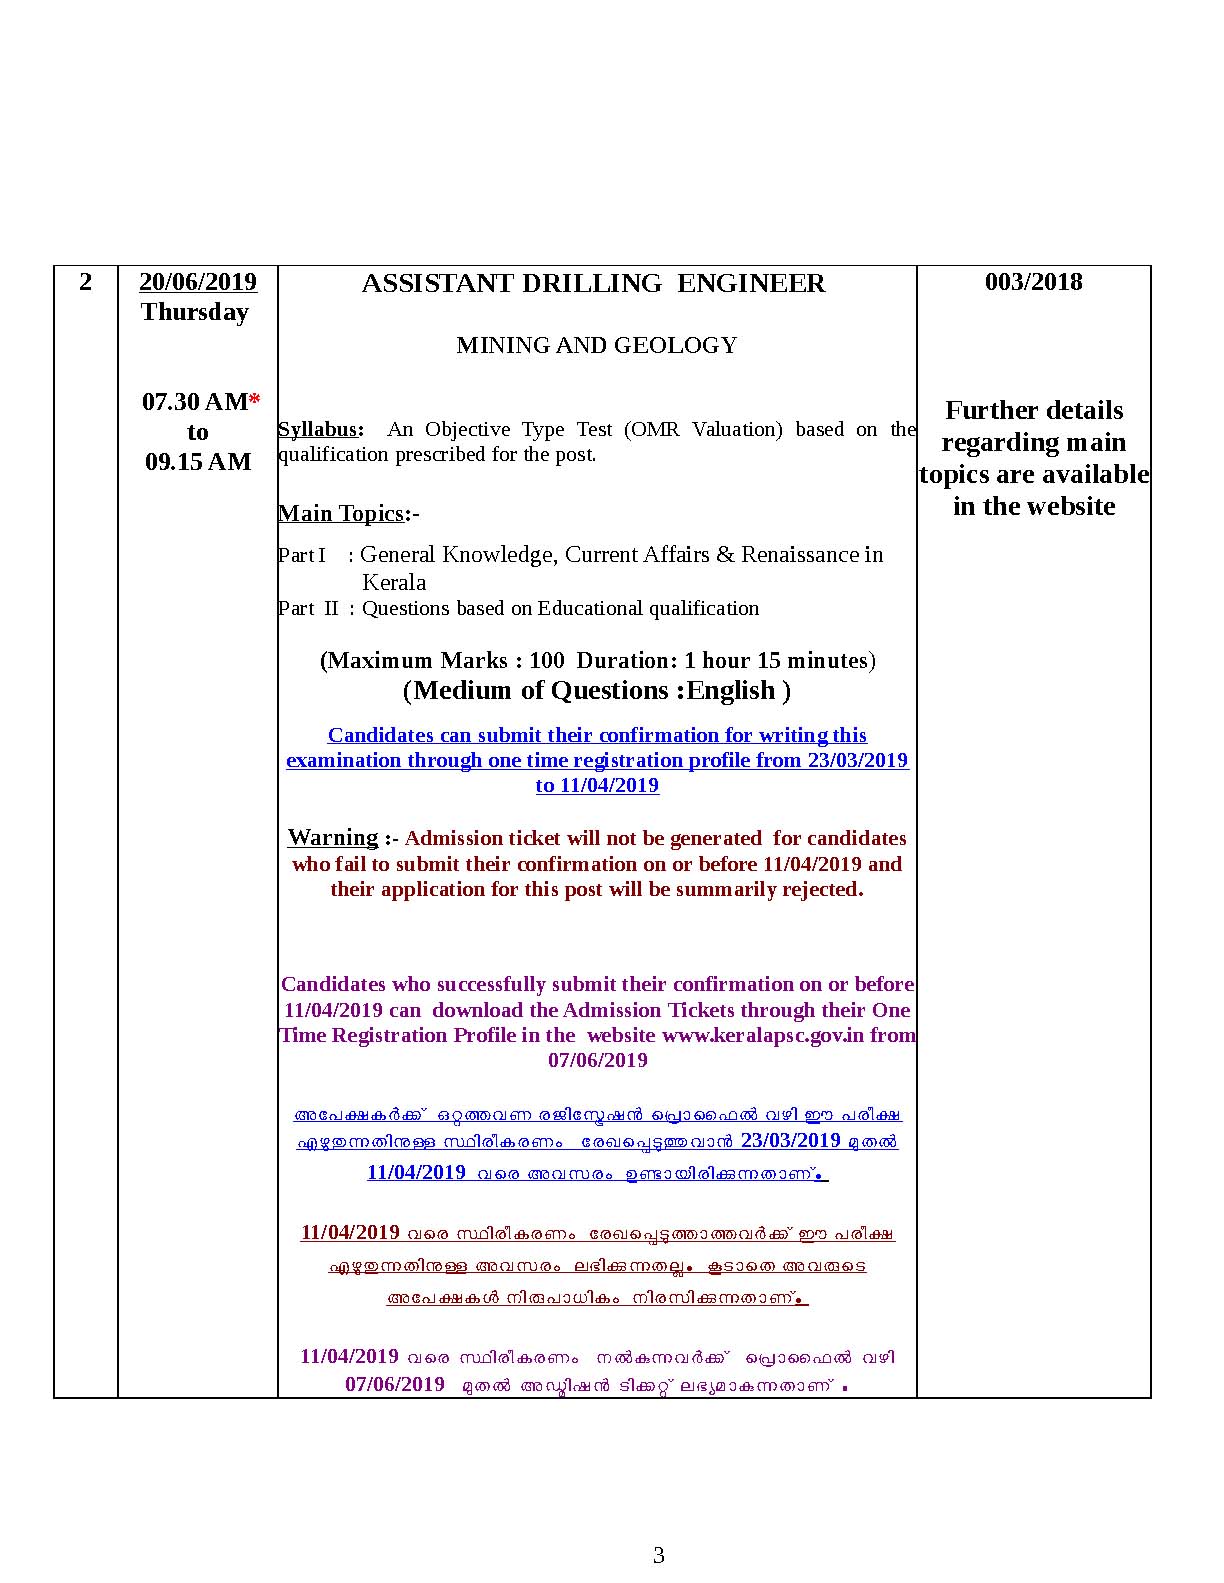 KPSC Examination Programme For The Month Of June 2019 - Notification Image 3